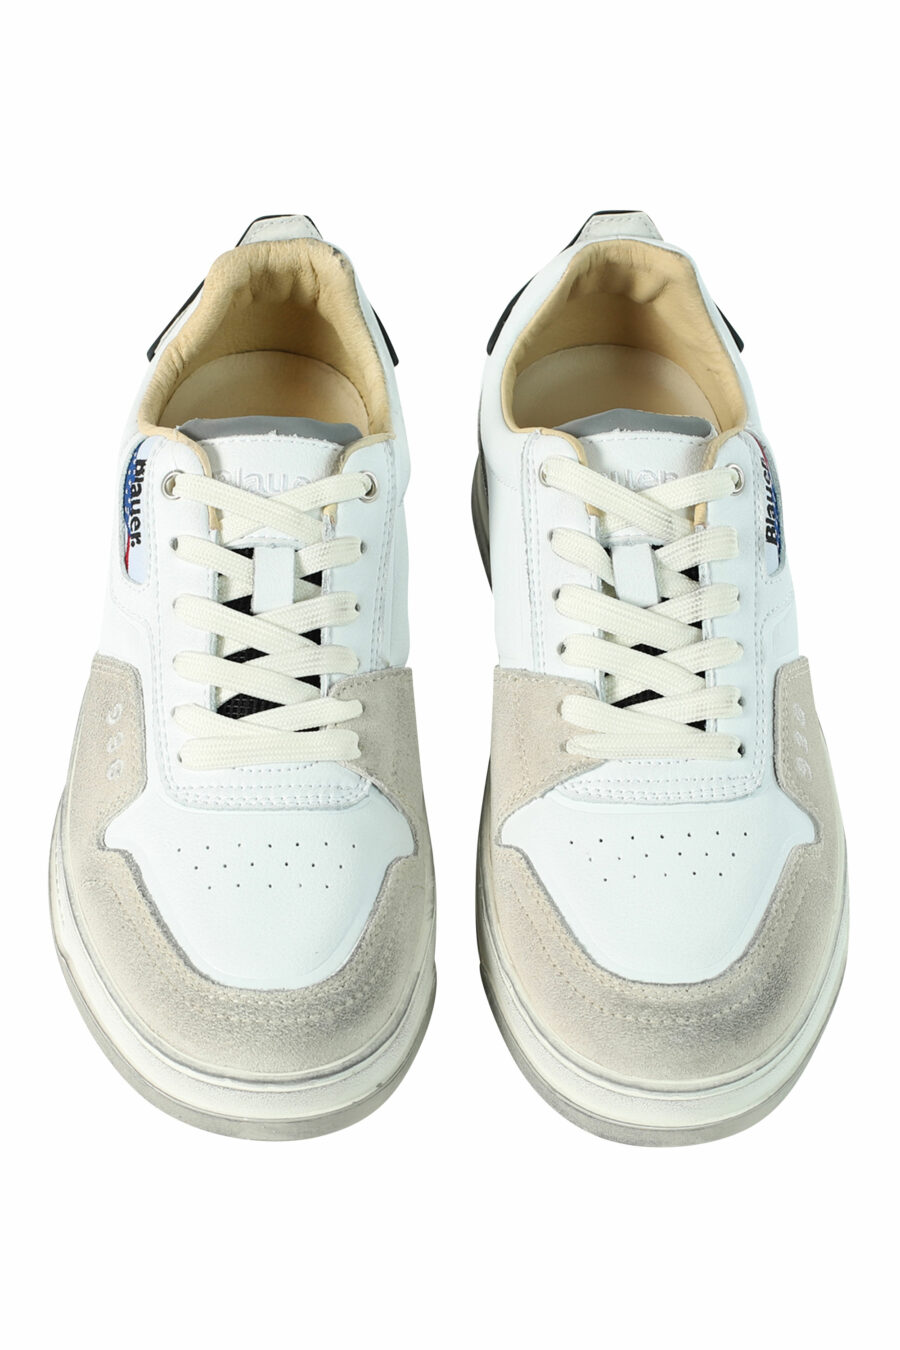 Trainers "HARPER" white mix with beige - 8058156494961 5